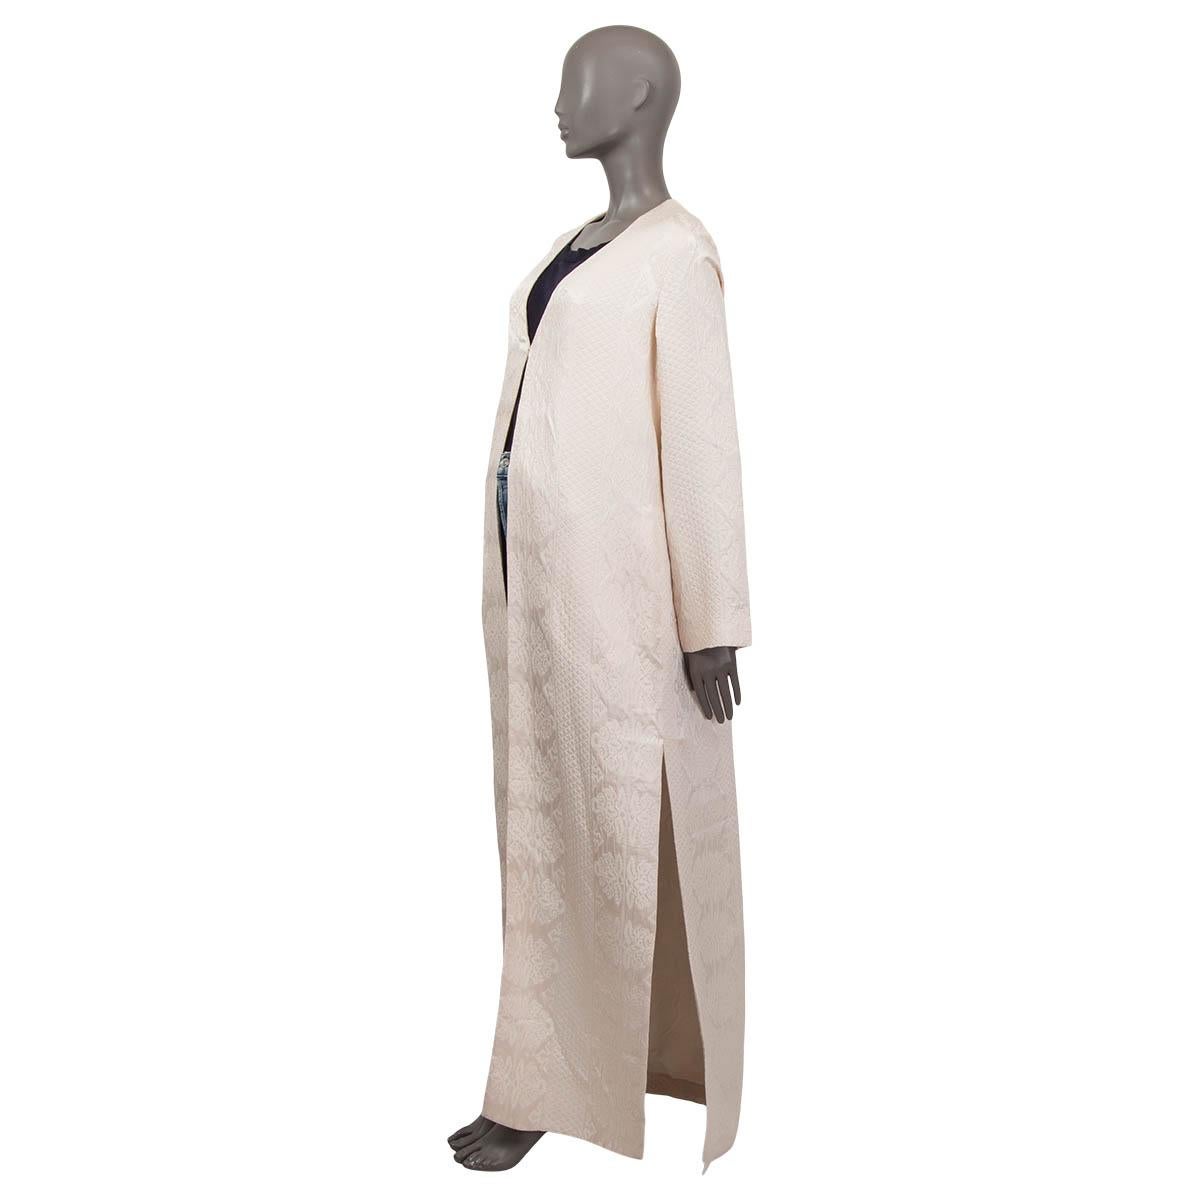 100% authentic The Row 'Muan' coat in pearl Matelassé wool (56%), meryl (36%) and silk (8% - please note the content tag is missing). Features ornamental pattern and two side-slits. Has long flared sleeves and two slit pockets on the side. Opens